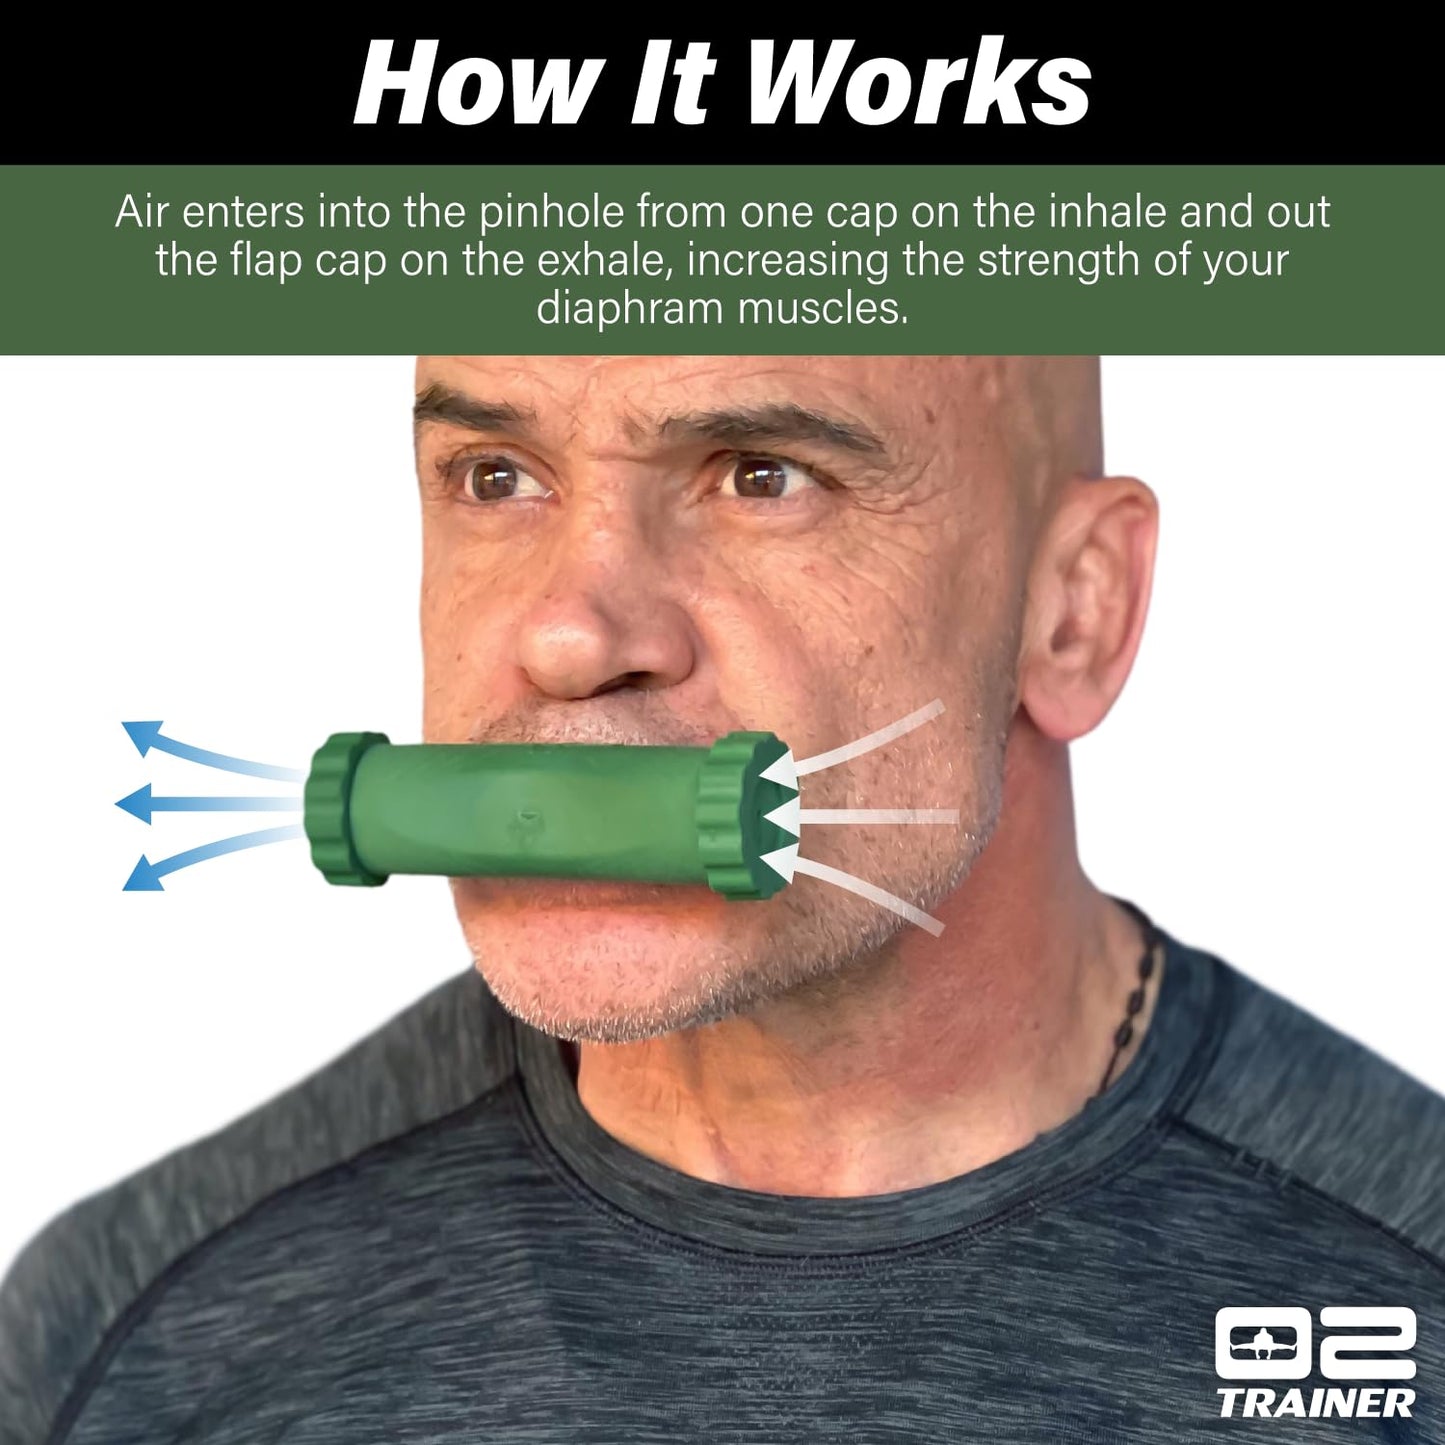 Bas Rutten O2 Inspiratory Muscle Training Device for Improving Diaphragmatic Breathing | Portable Lung Muscle and Respiratory Power Training Device | High Altitude Breathing Trainer | Green